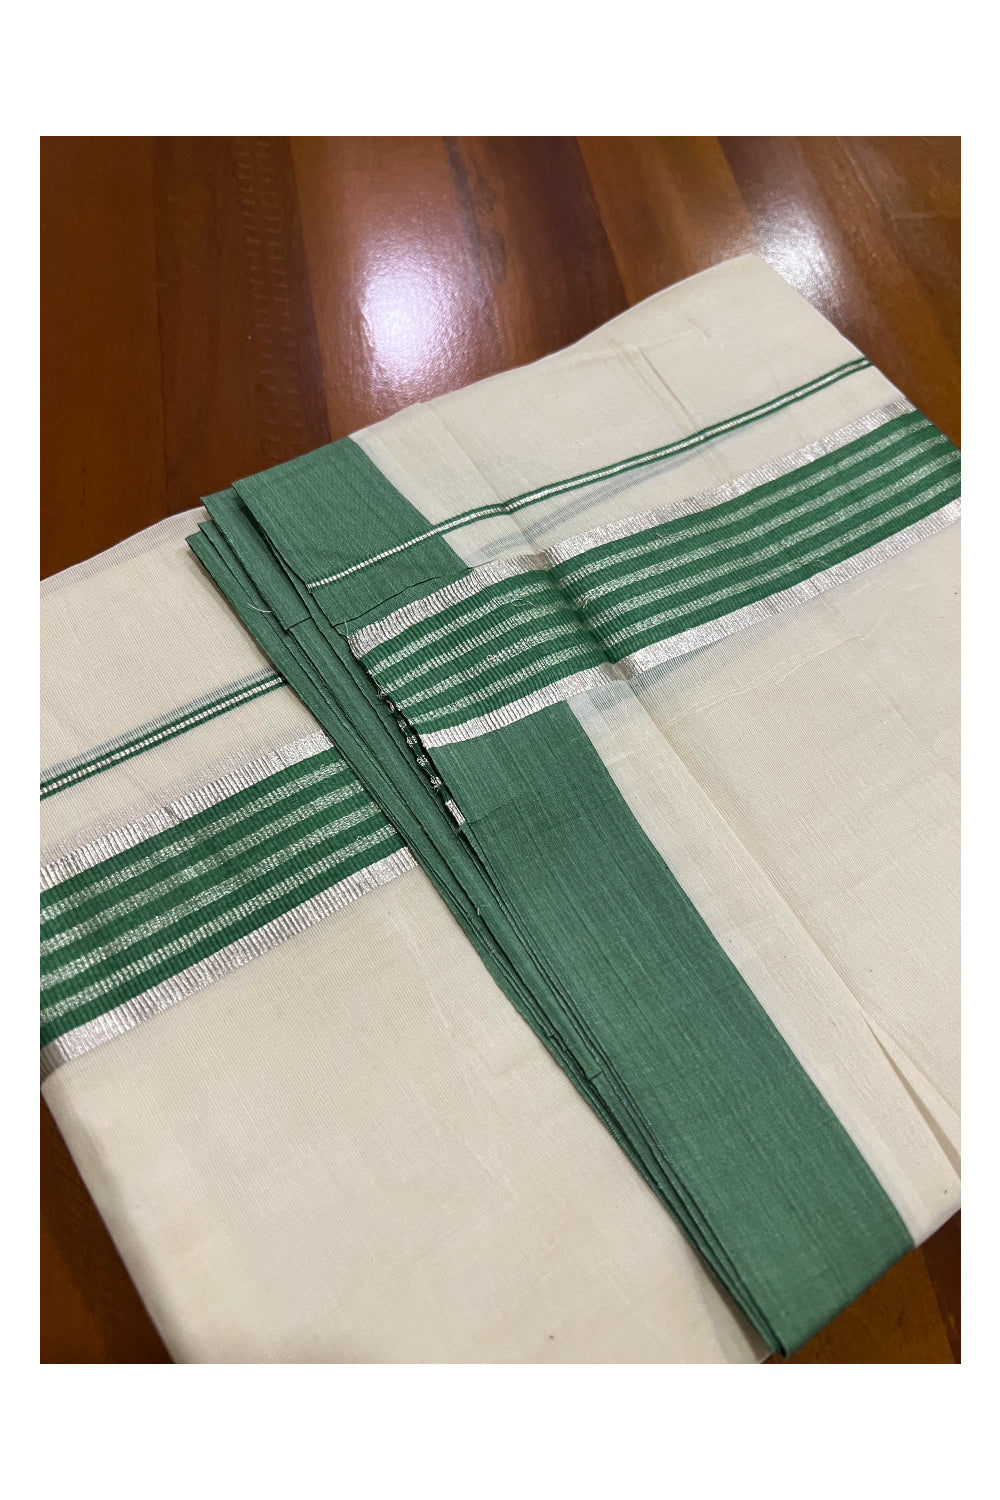 Off White Kerala Double Mundu with Green and Silver Kasavu Lines Border (South Indian Dhoti)